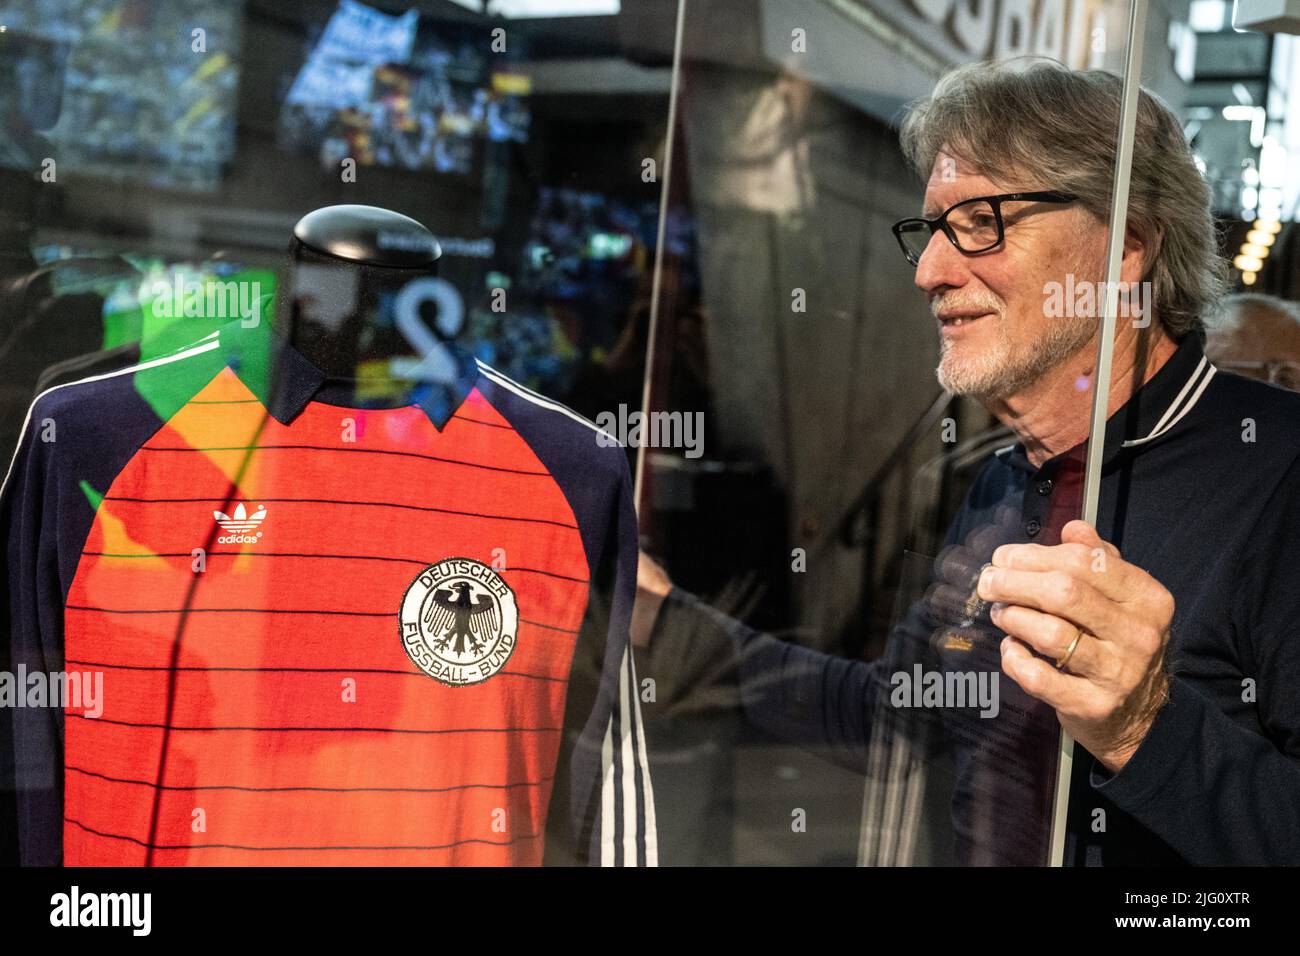 Dortmund, Germany. 06th July, 2022. National goalkeeper Toni Schumacher  looks at his former jersey from the 1982 World Cup semifinal match against  France at the German Football Museum. To commemorate the 40th